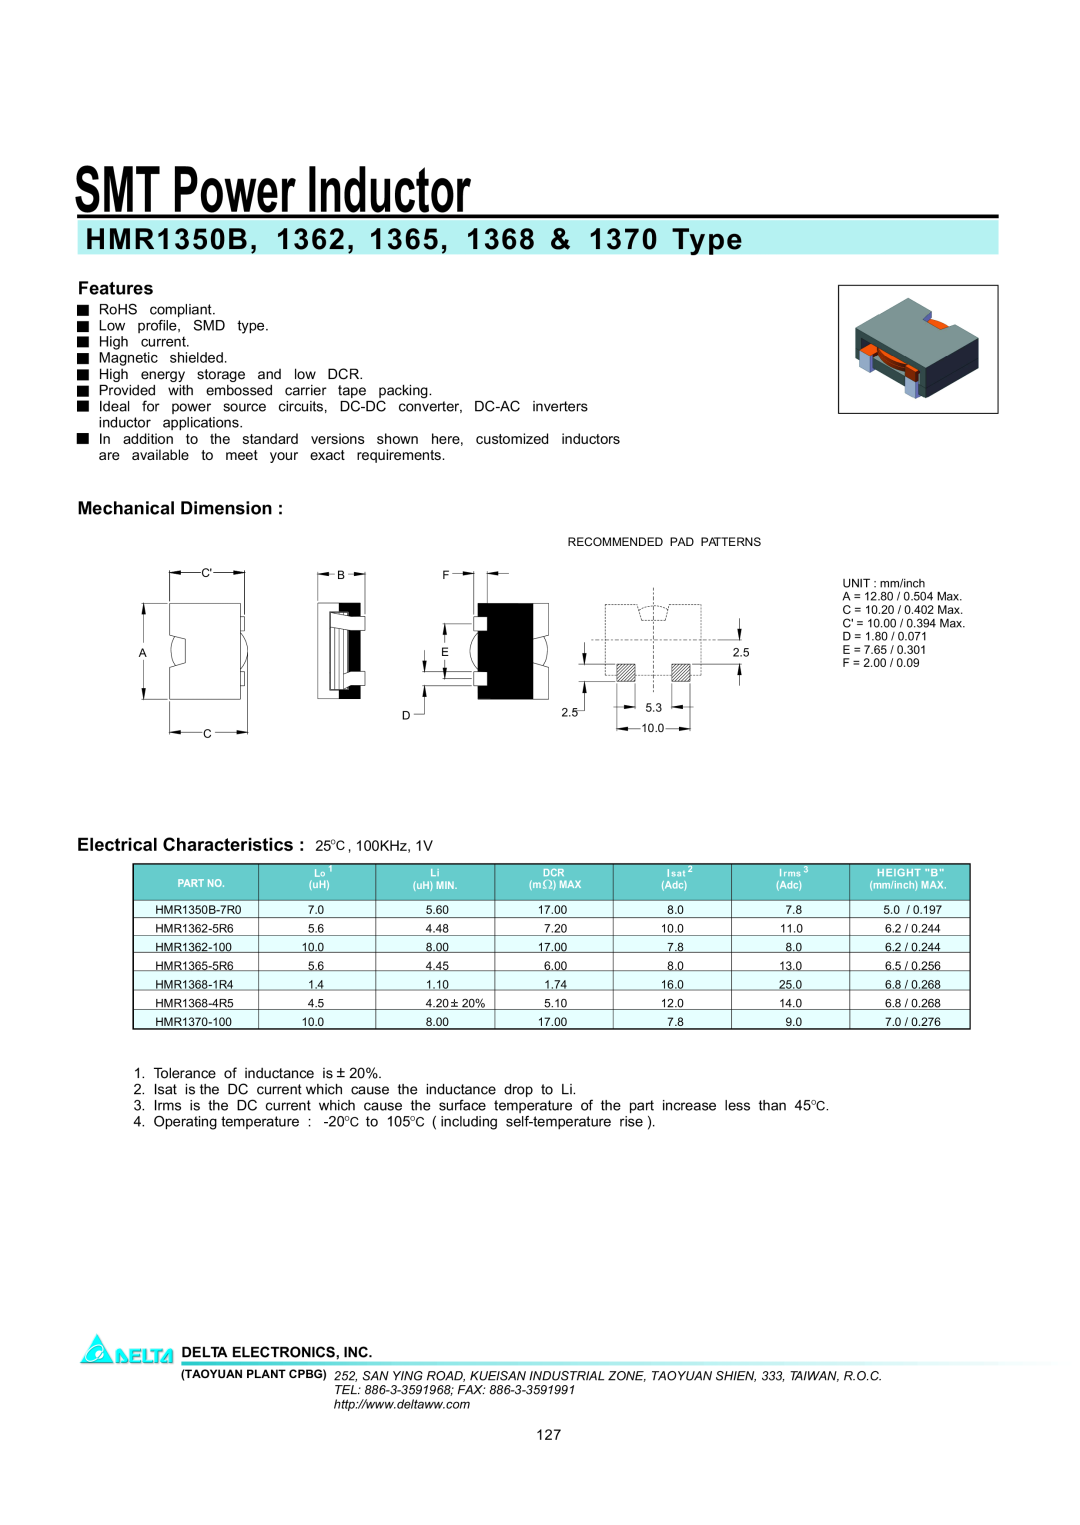 Delta Electronics manual SMT Power Inductor, HMR1350B, 1362, 1365, 1368 & 1370 Type, Features, Mechanical Dimension 